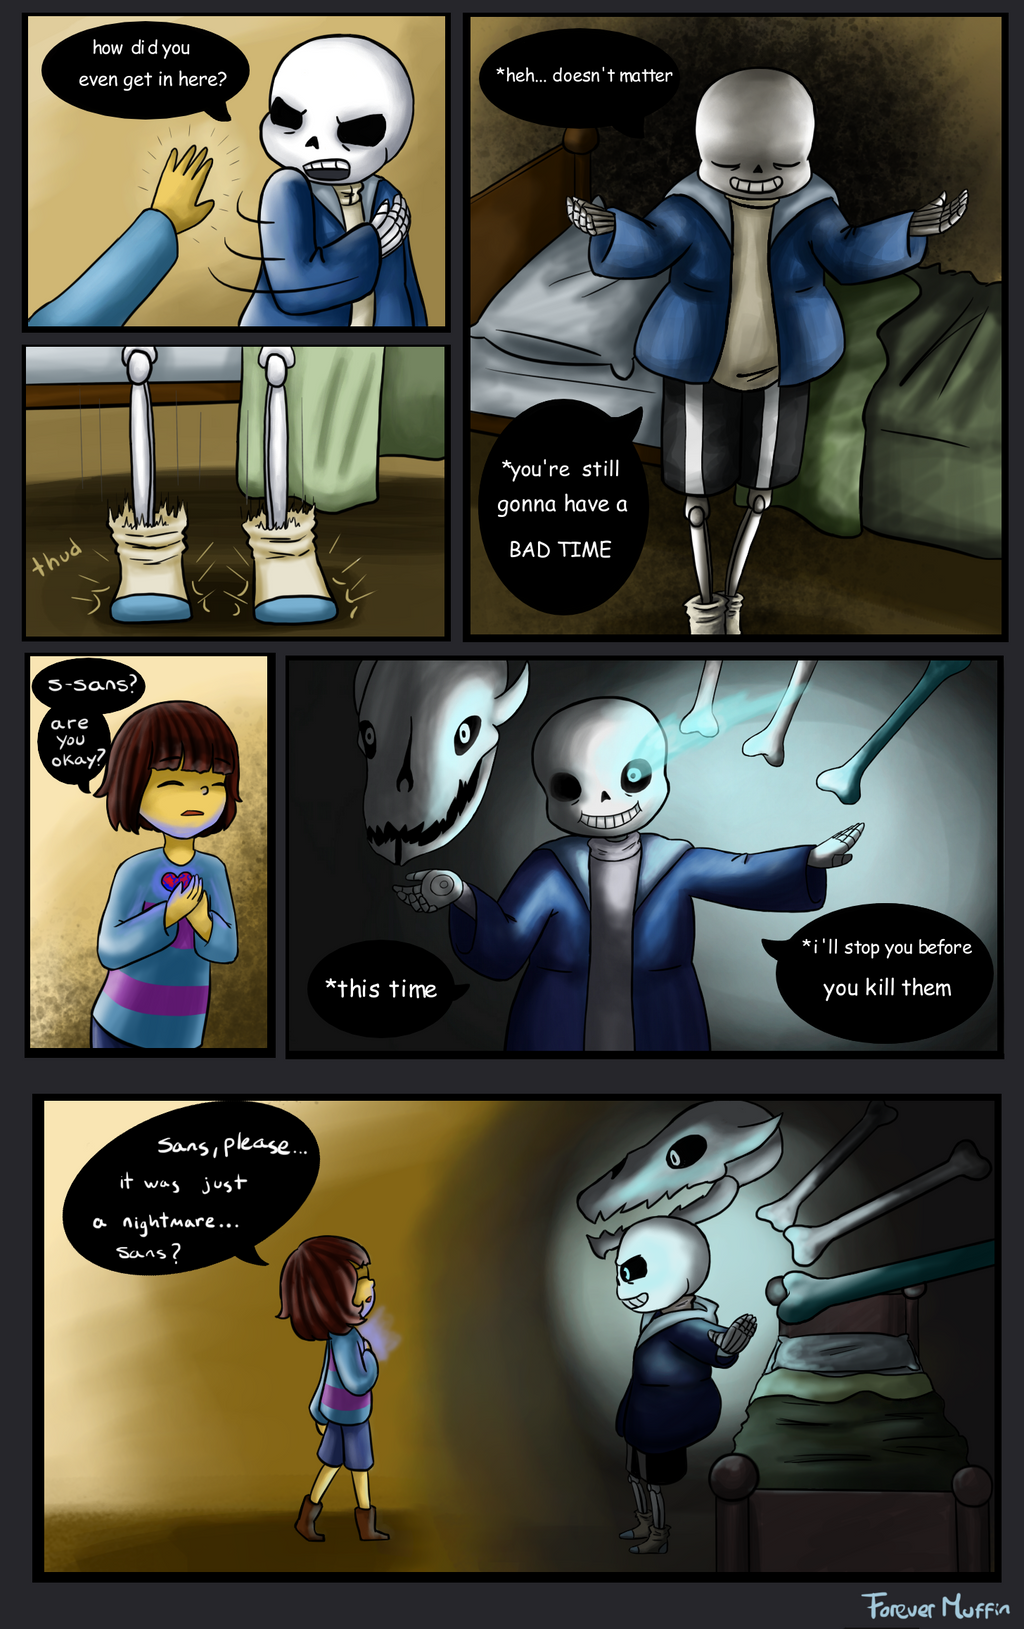 The Nightmare - Comic - Page 2 by ForeverMuffin on DeviantArt